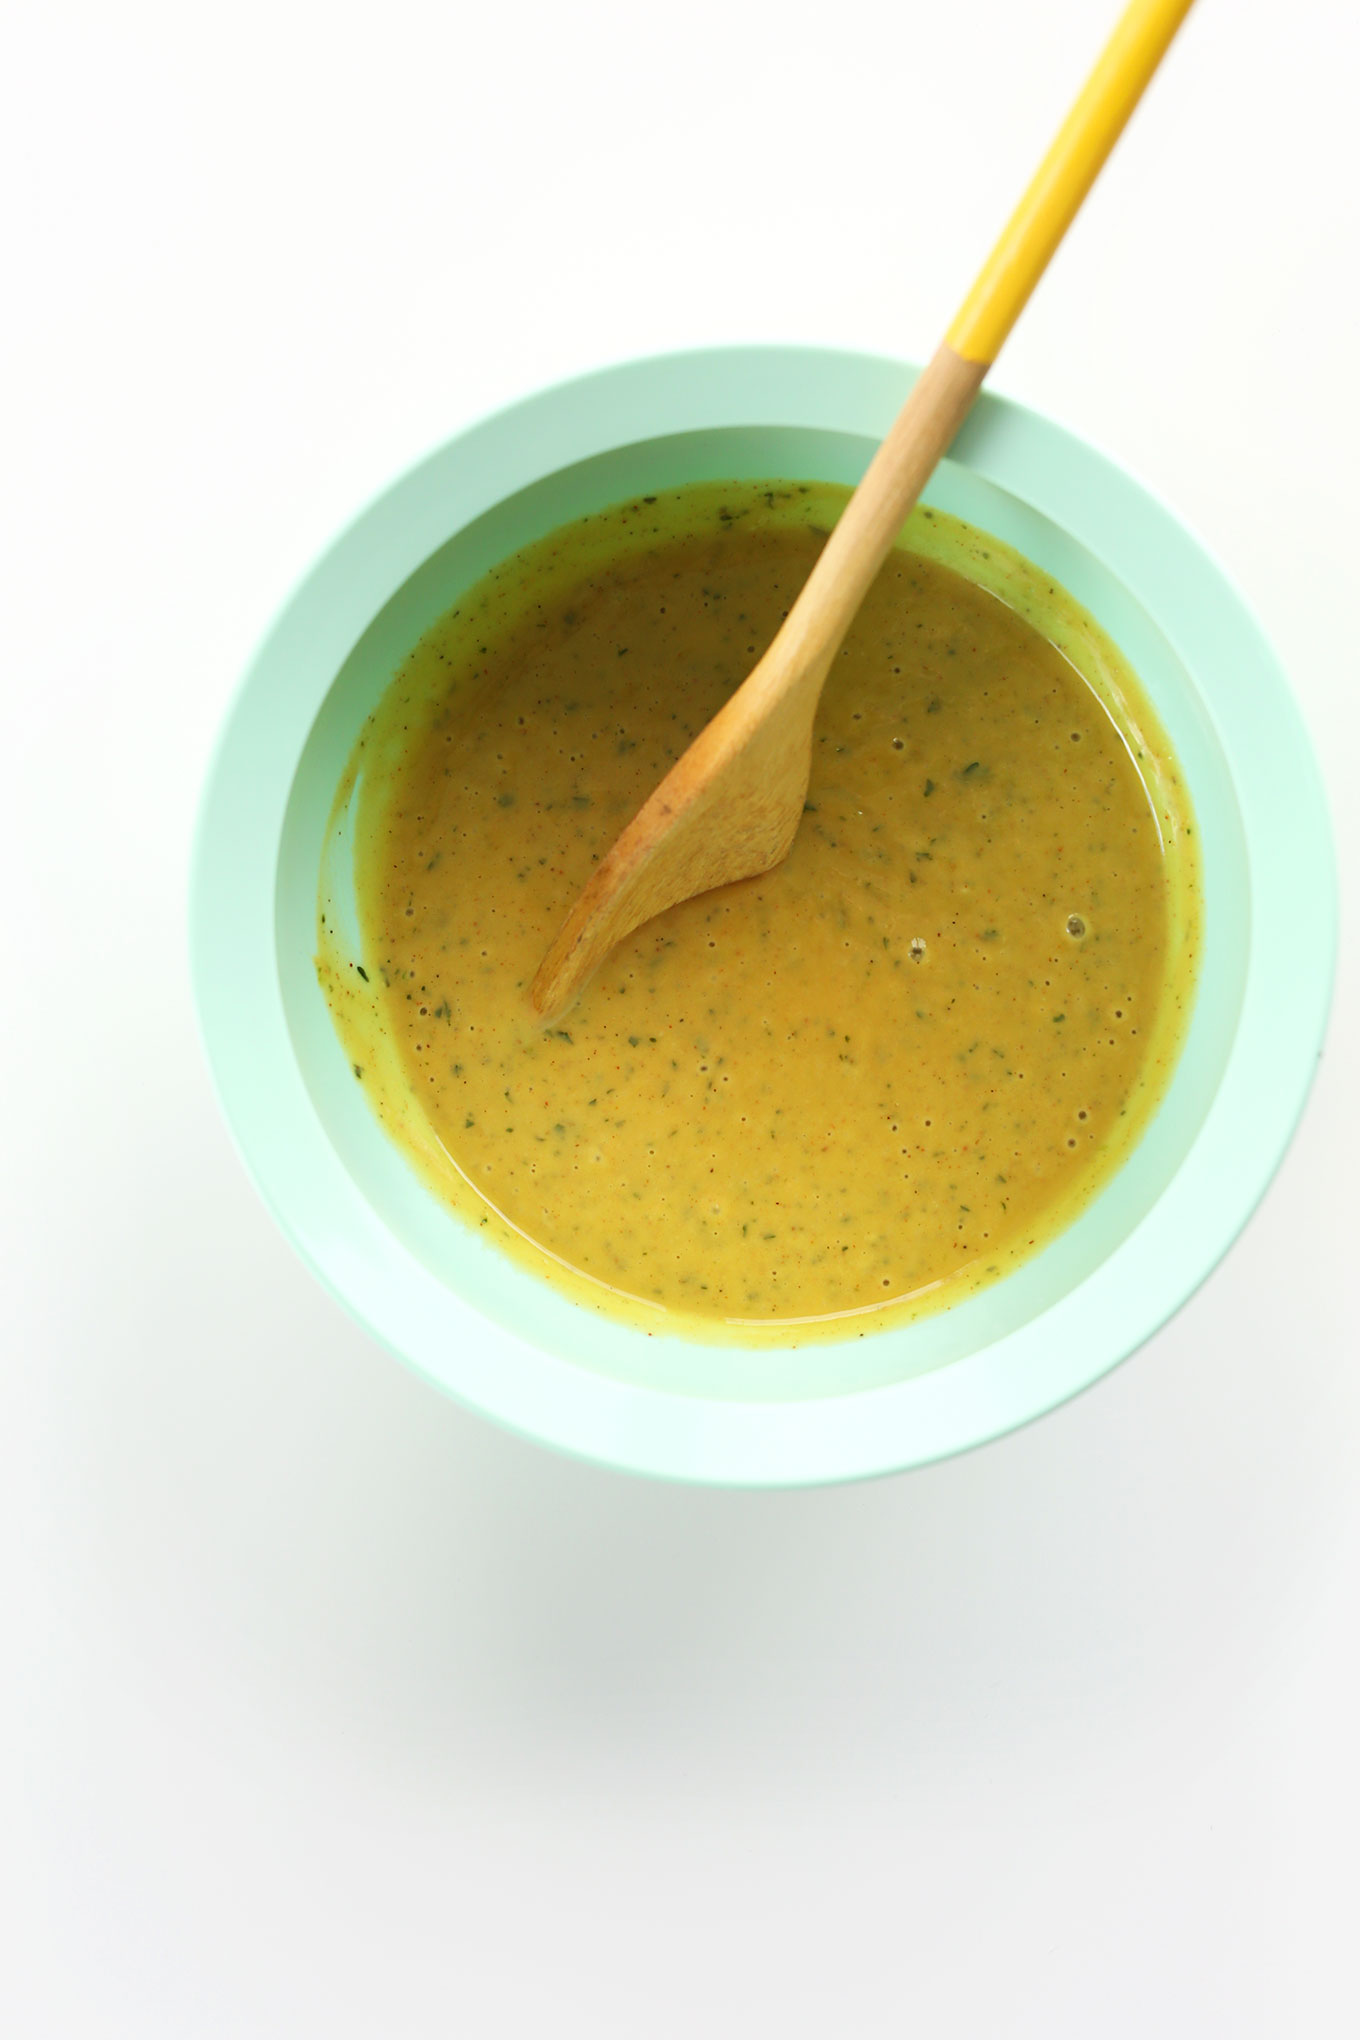 Bowl of Creamy Orange Chili Cilantro Dressing for drizzling on a delicious vegan dinner salad